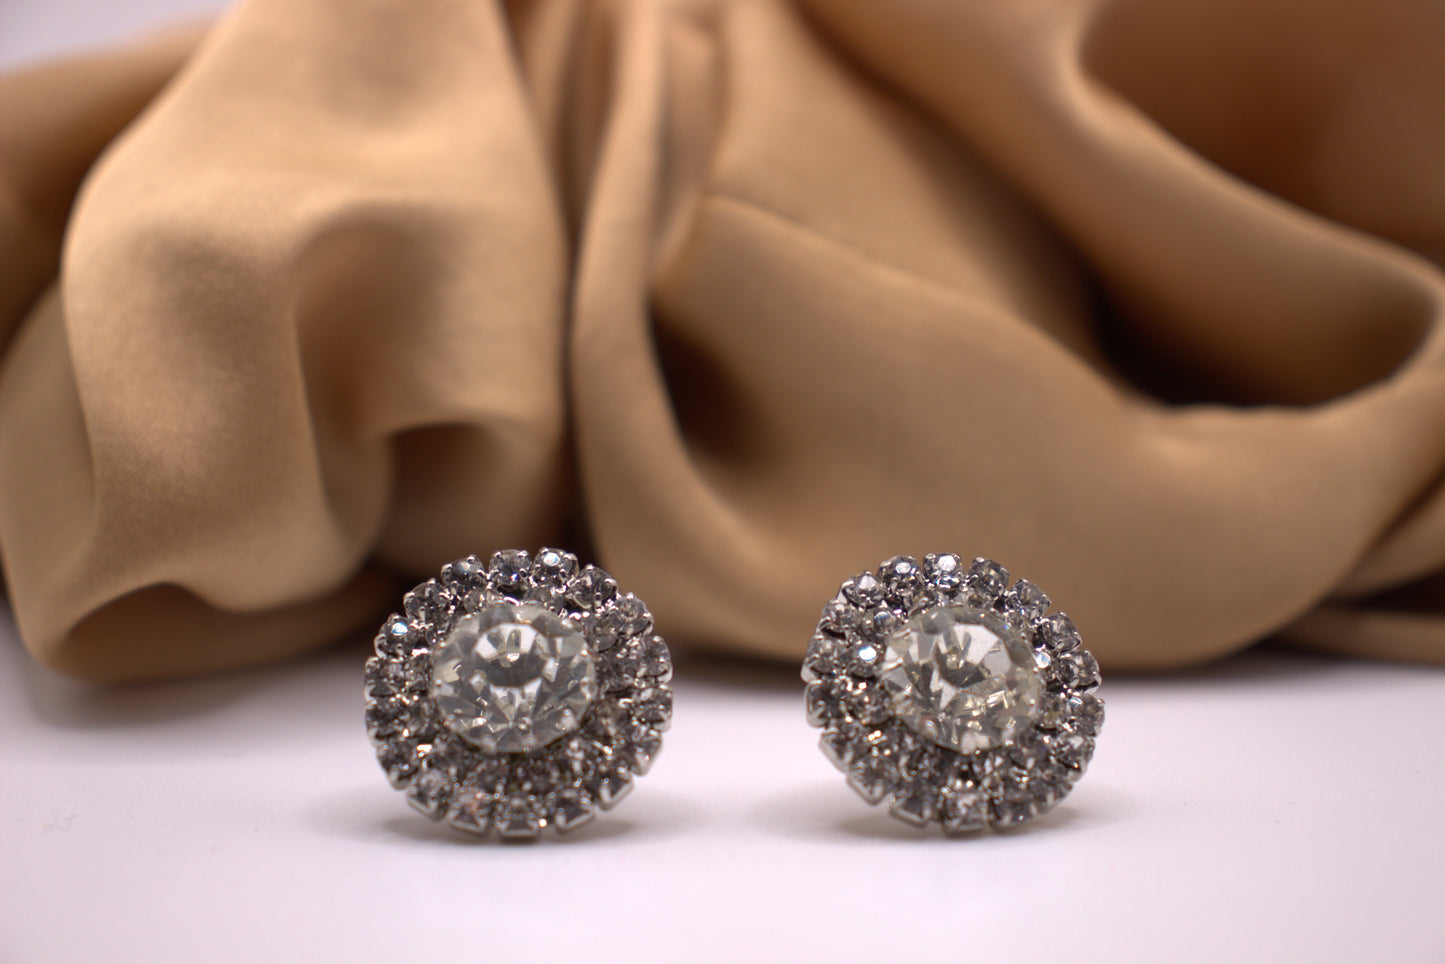 Queen Stud Earrings - The Epitome of Elegance and Glamour-Hypoallergenic